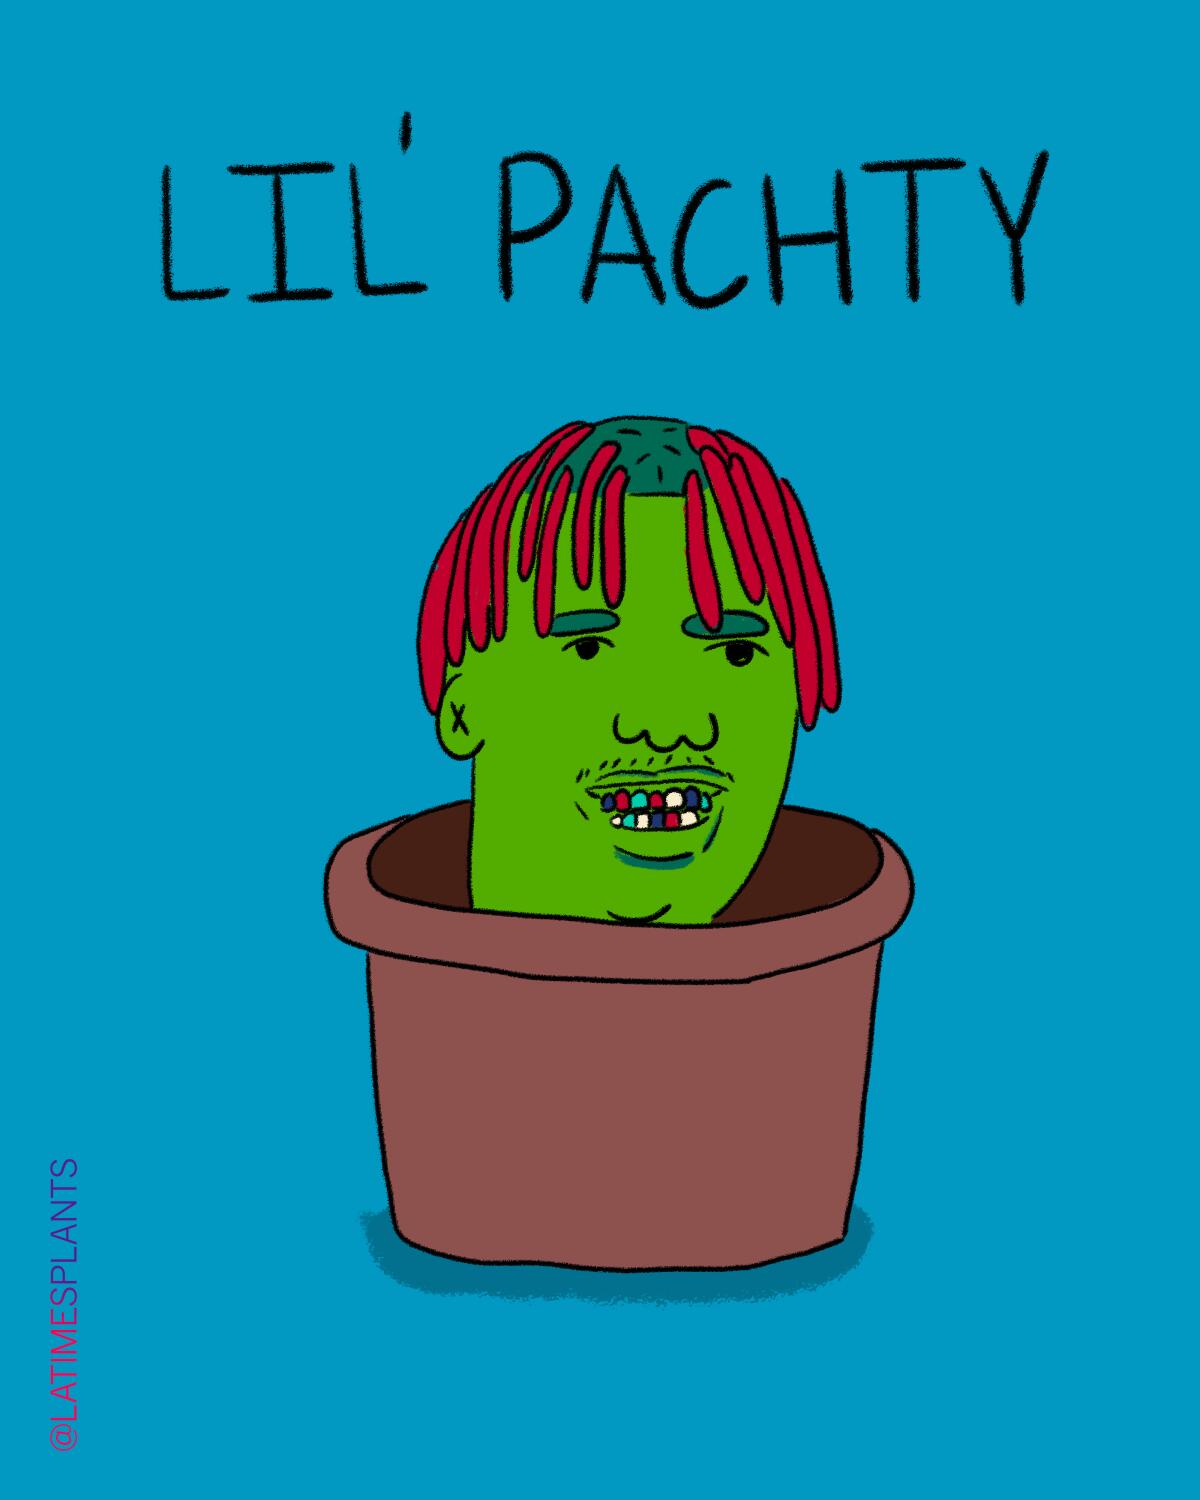 Lil' pachty